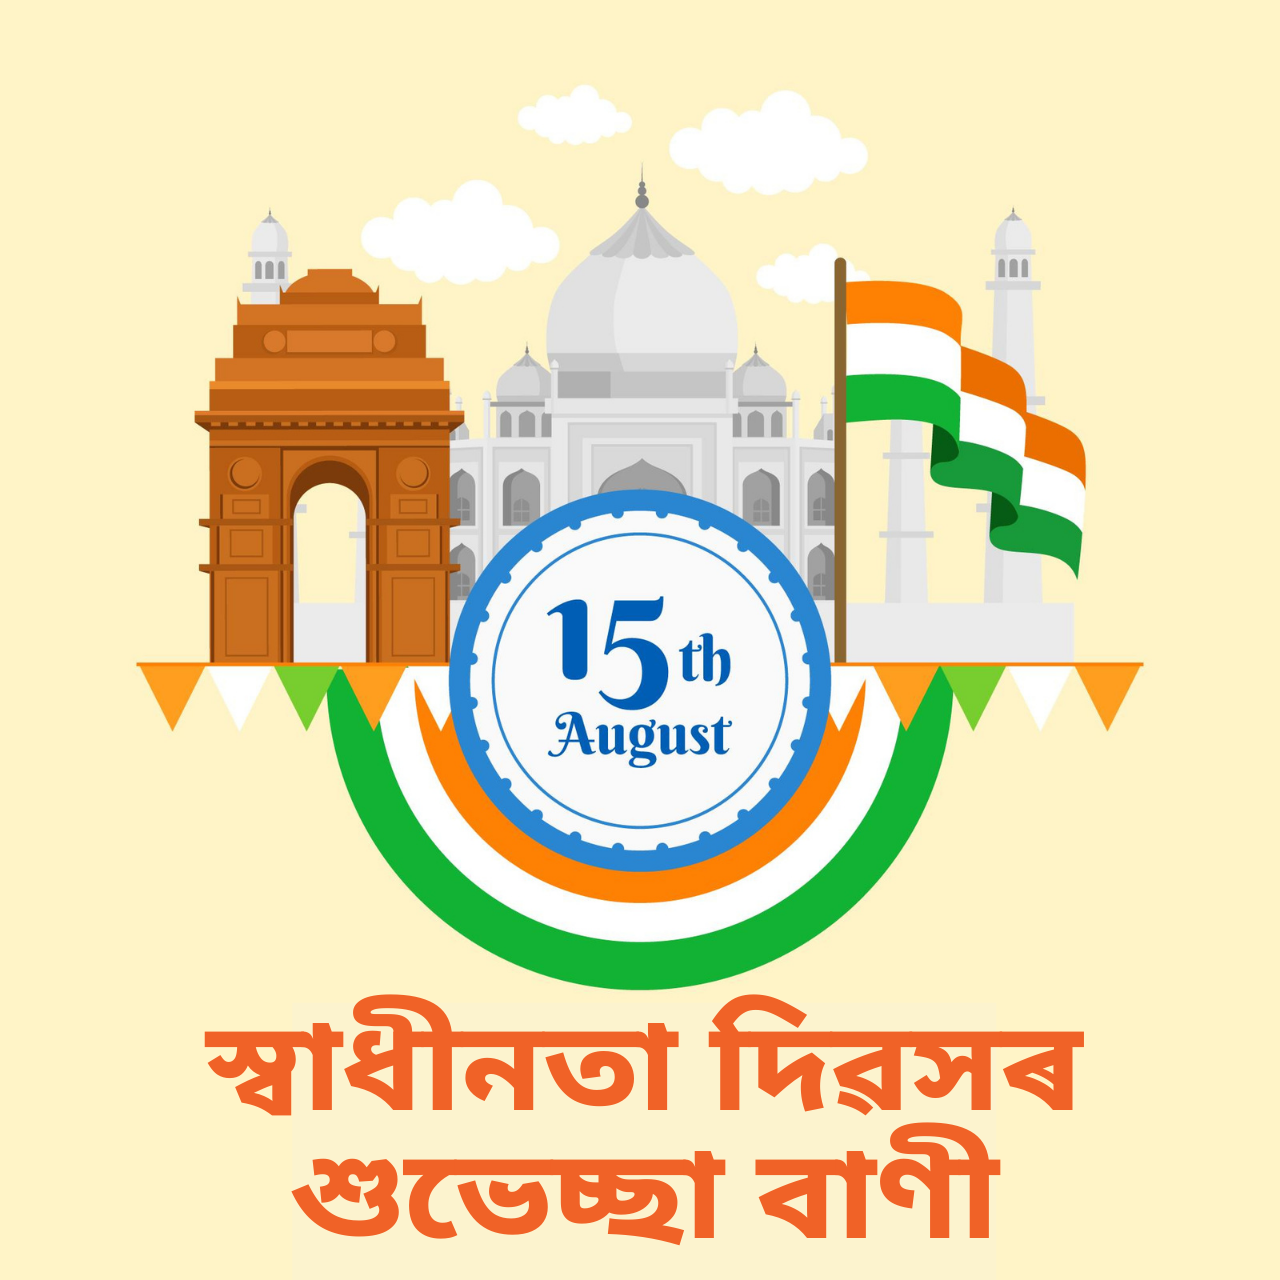 Independence Day 2021 Assamese Wishes, Images, Quotes, Greetings, and Status